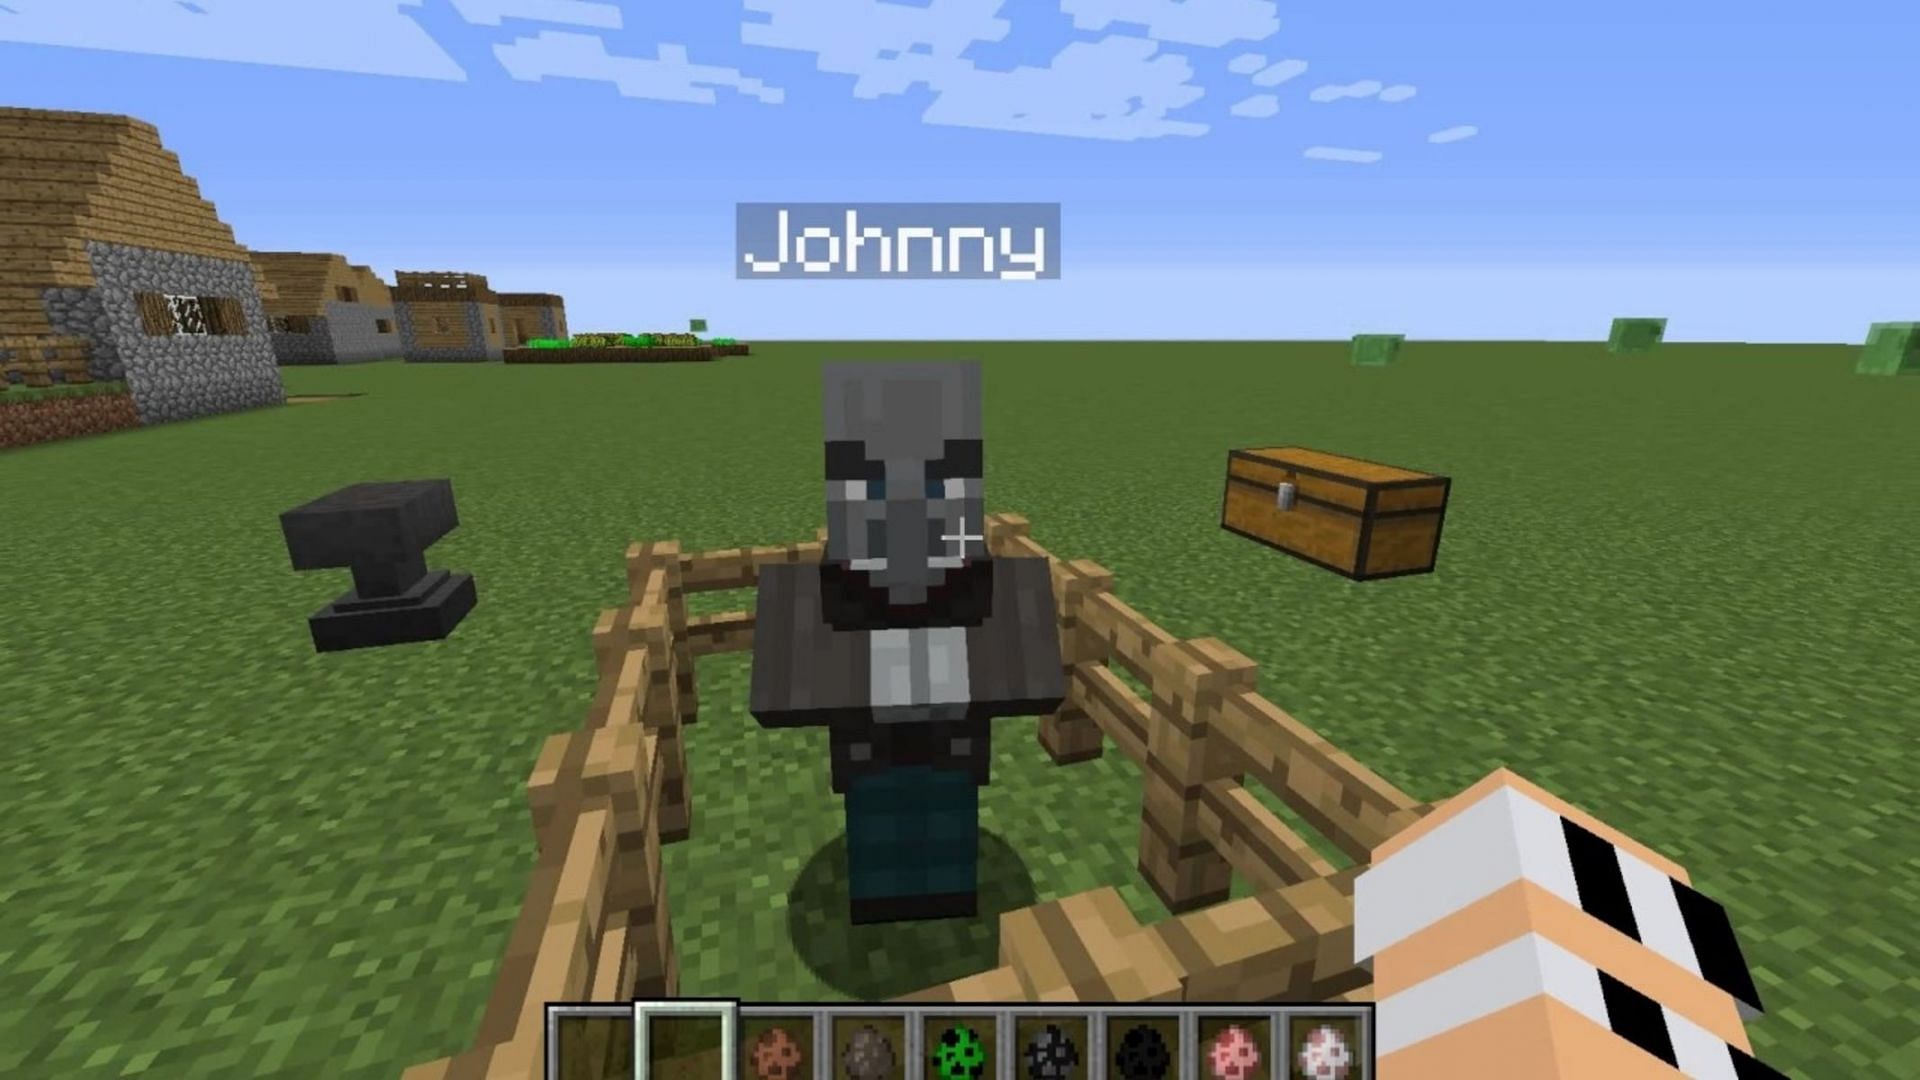 What Is The Johnny Easter Egg In Minecraft